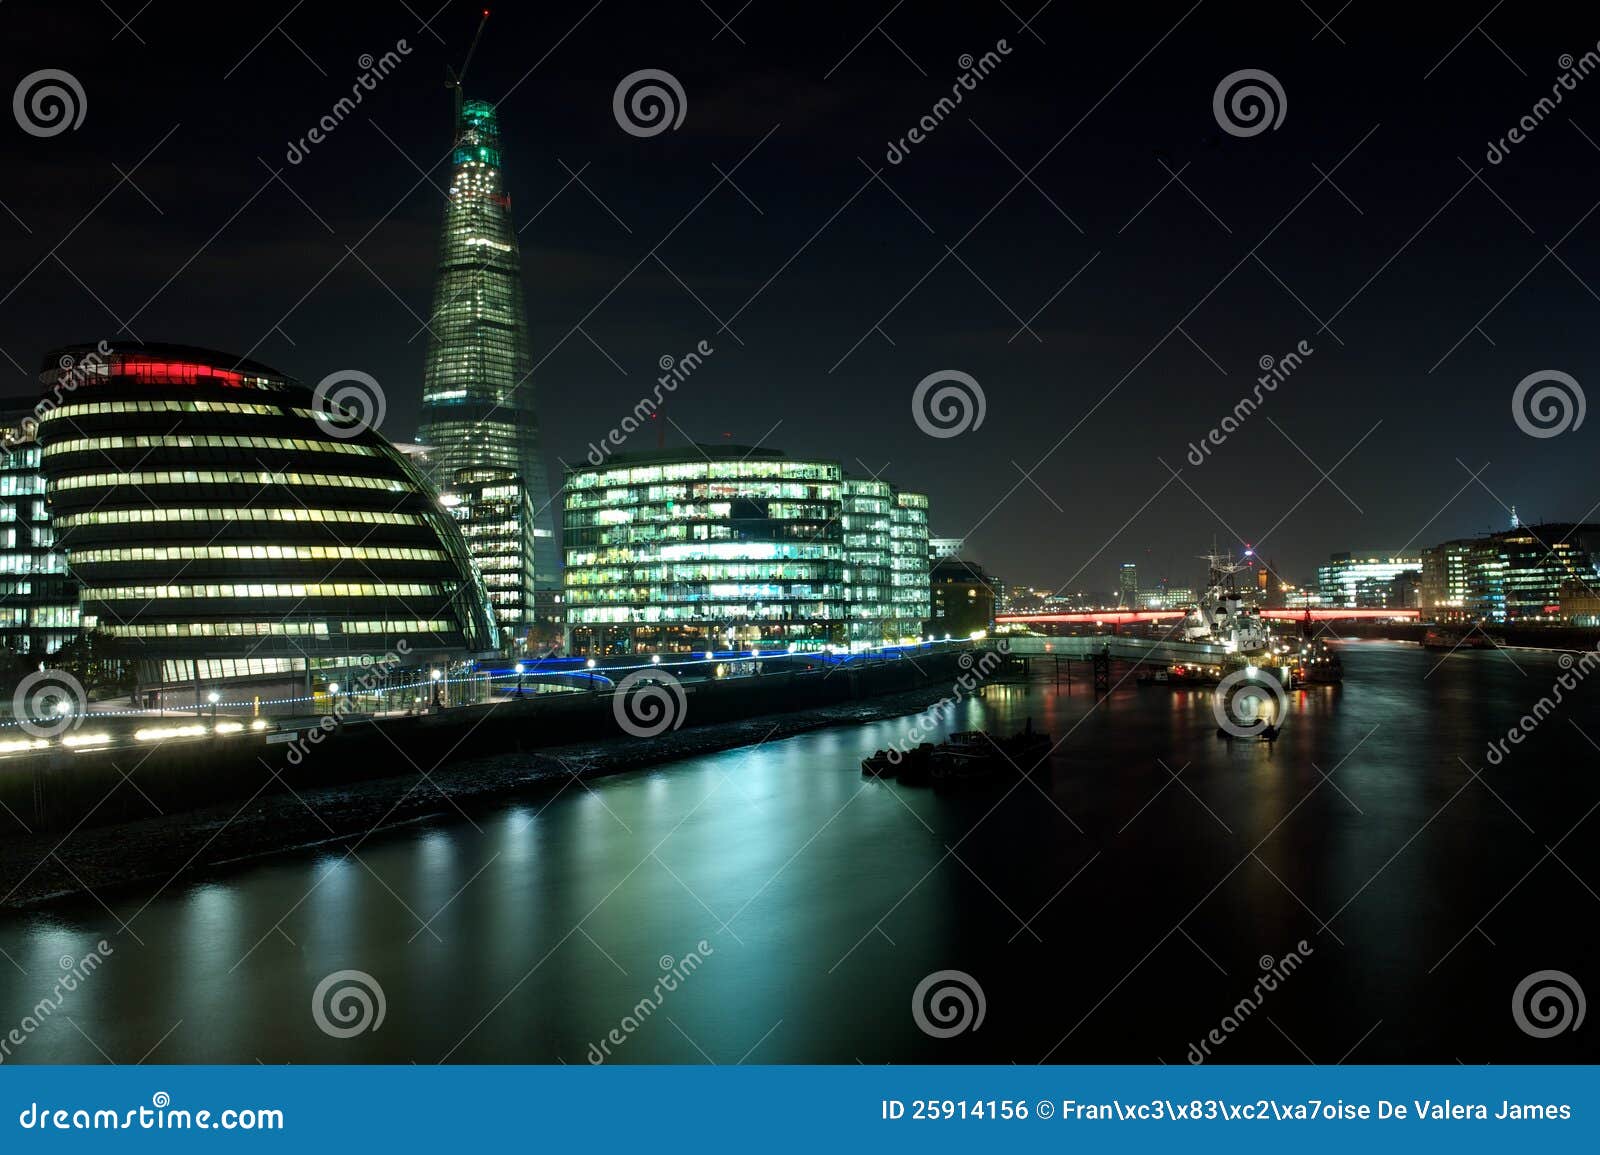 city hall, shard building and hms belfast at night